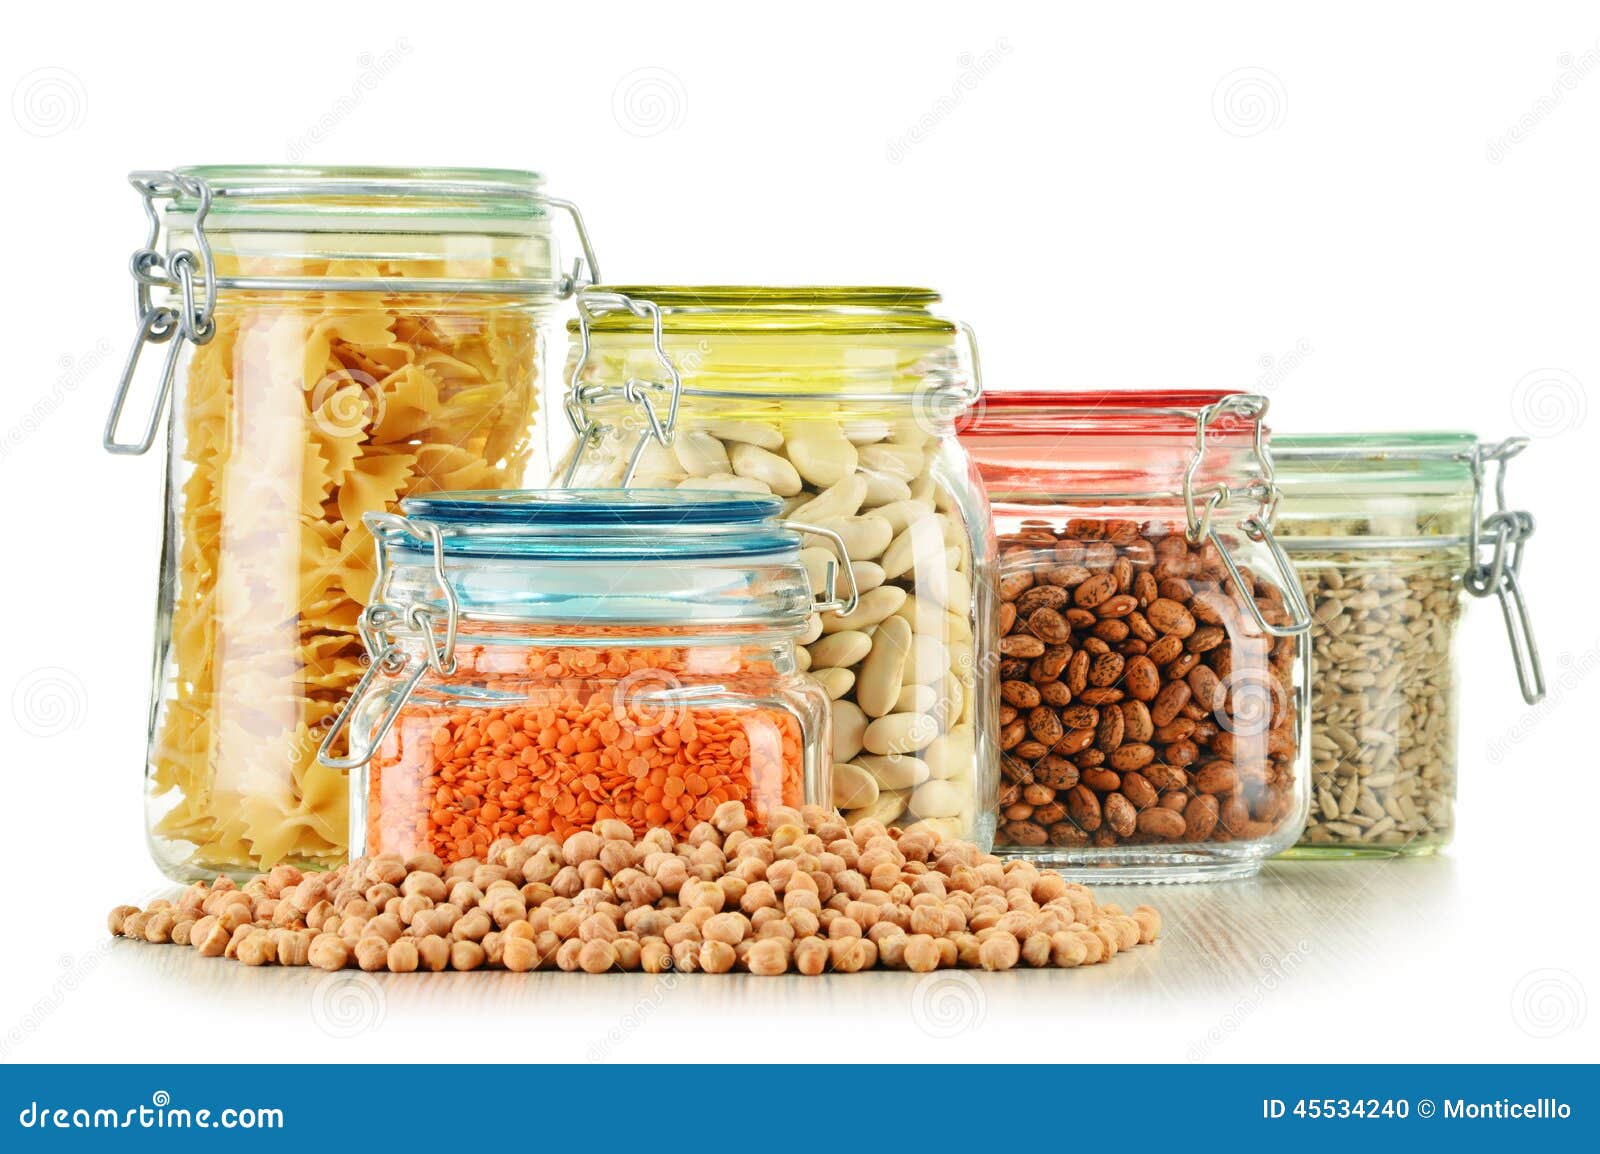 Jars with Grain Foods on White Stock Photo - Image of lentil, jars ...